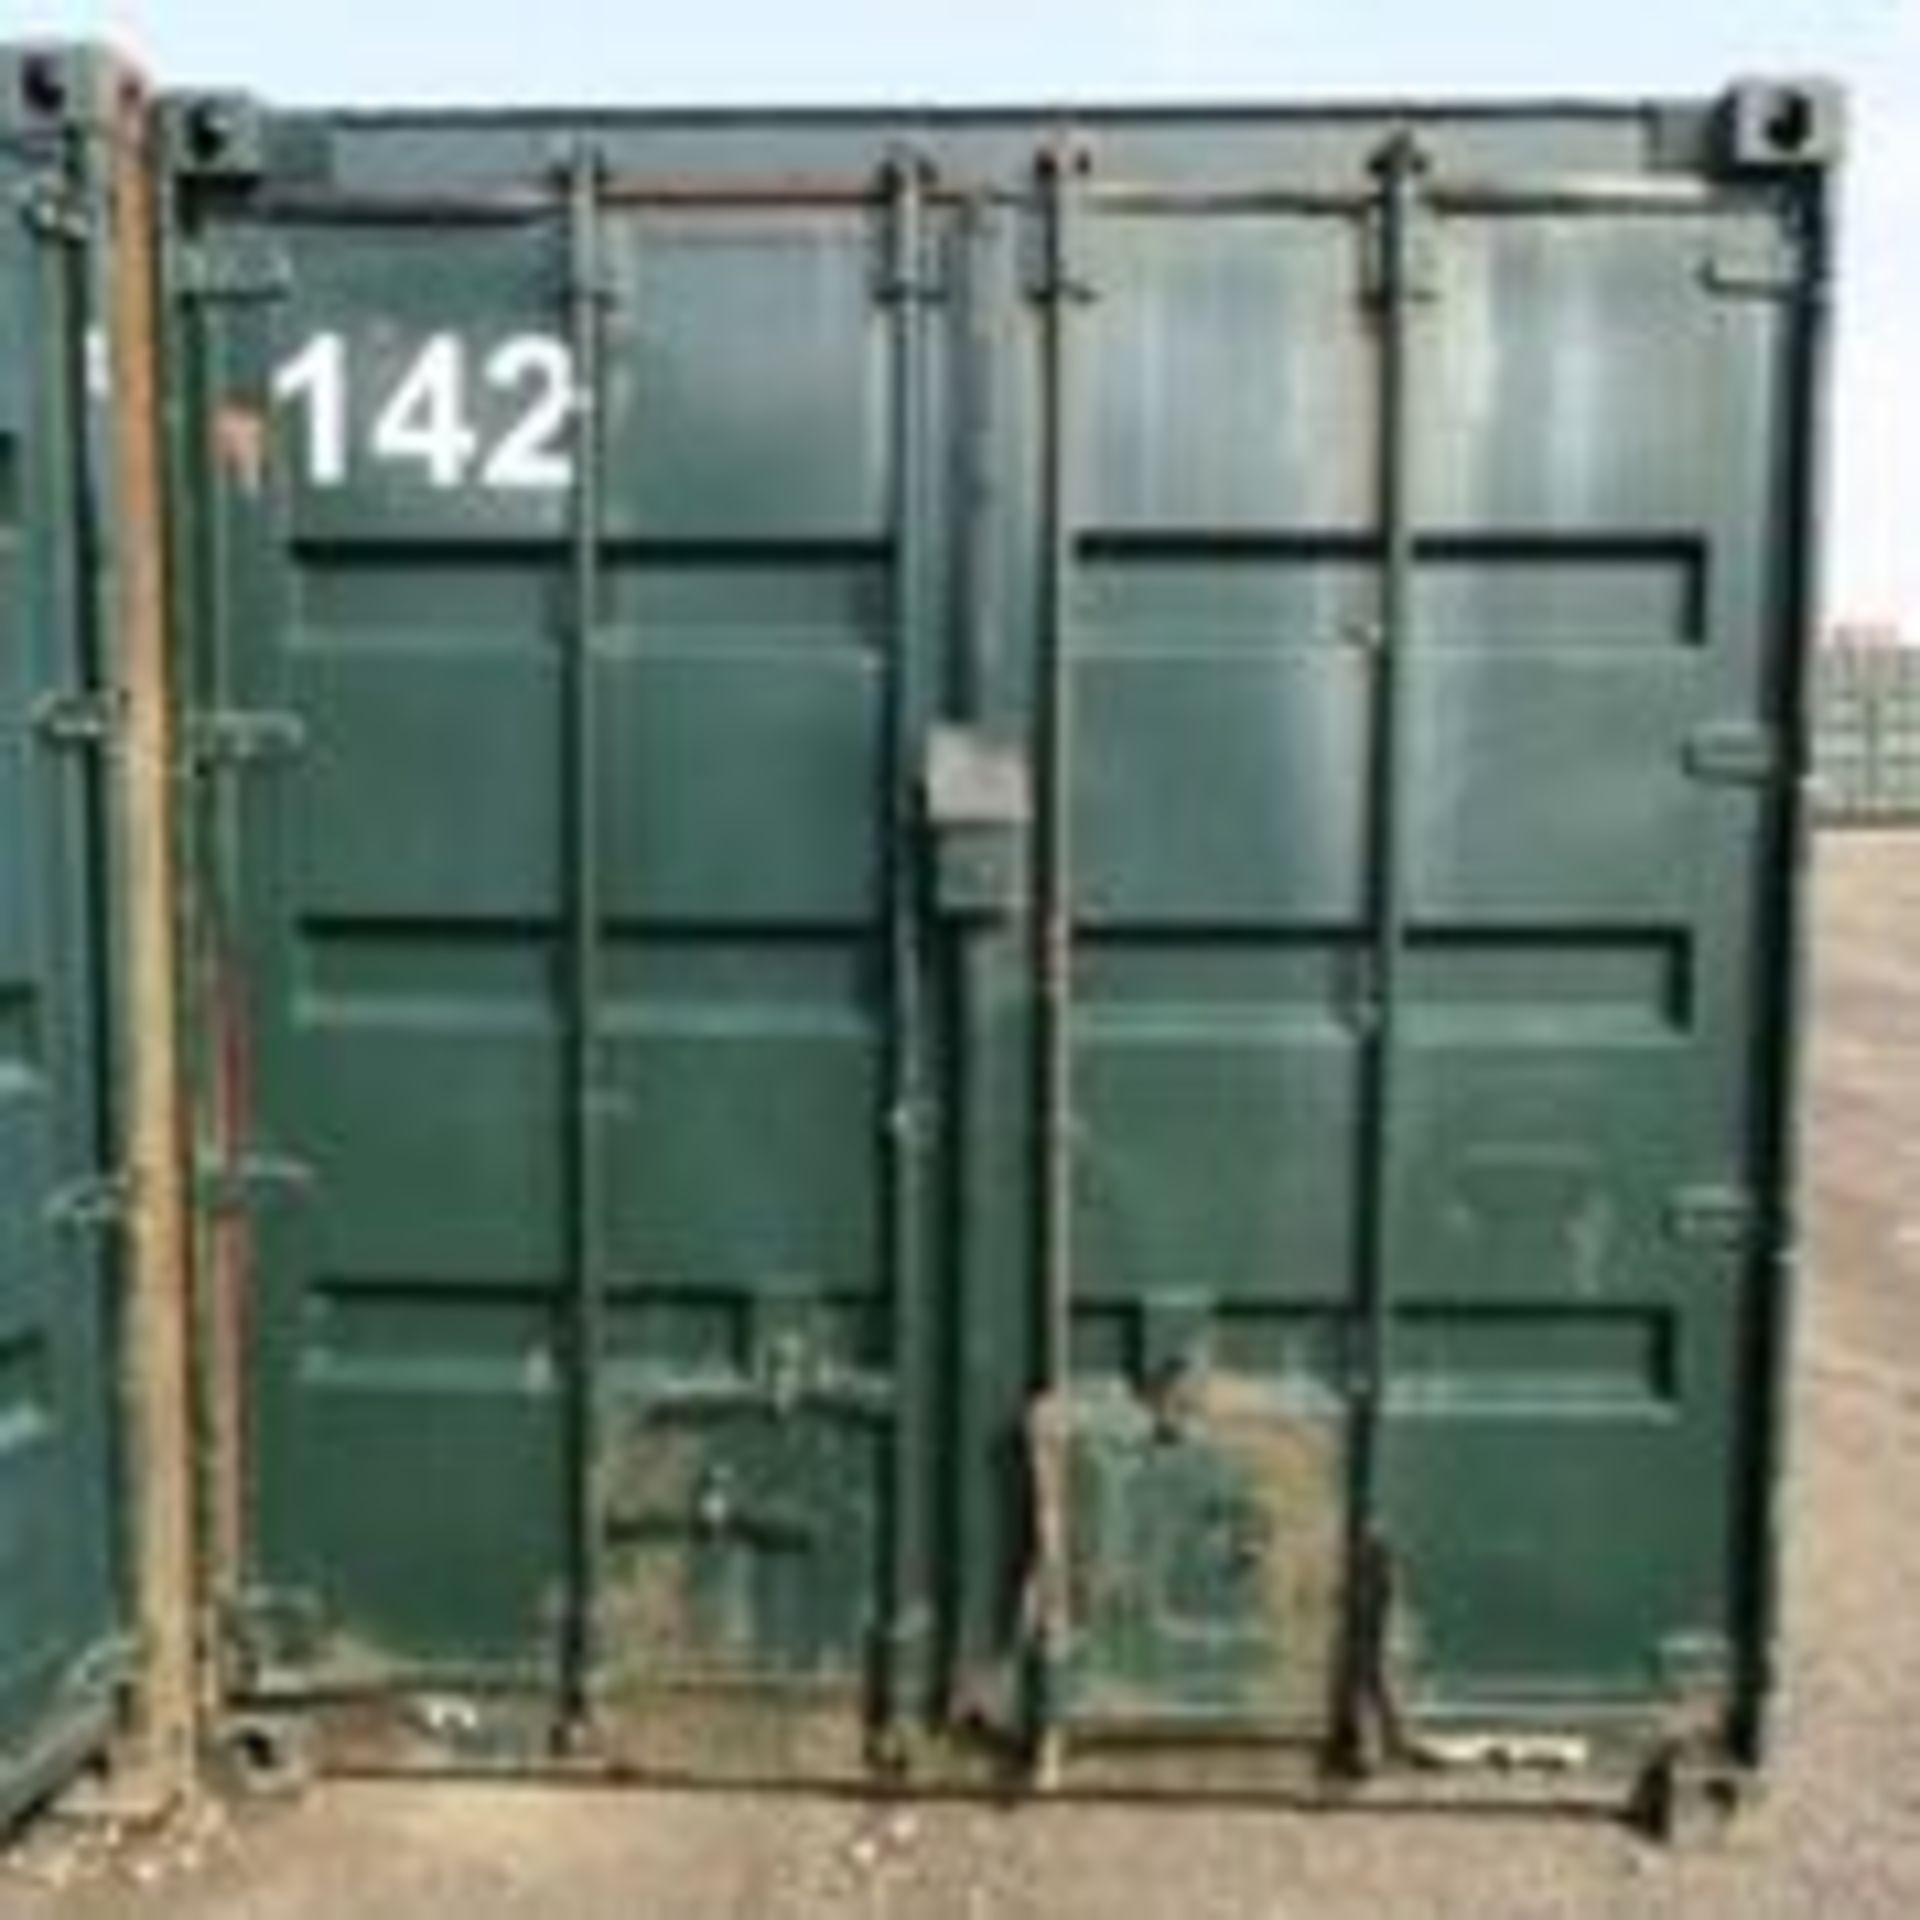 * 40ft shipping container (ID 142) with insulated roof. Sold loaded free onto buyers transport.